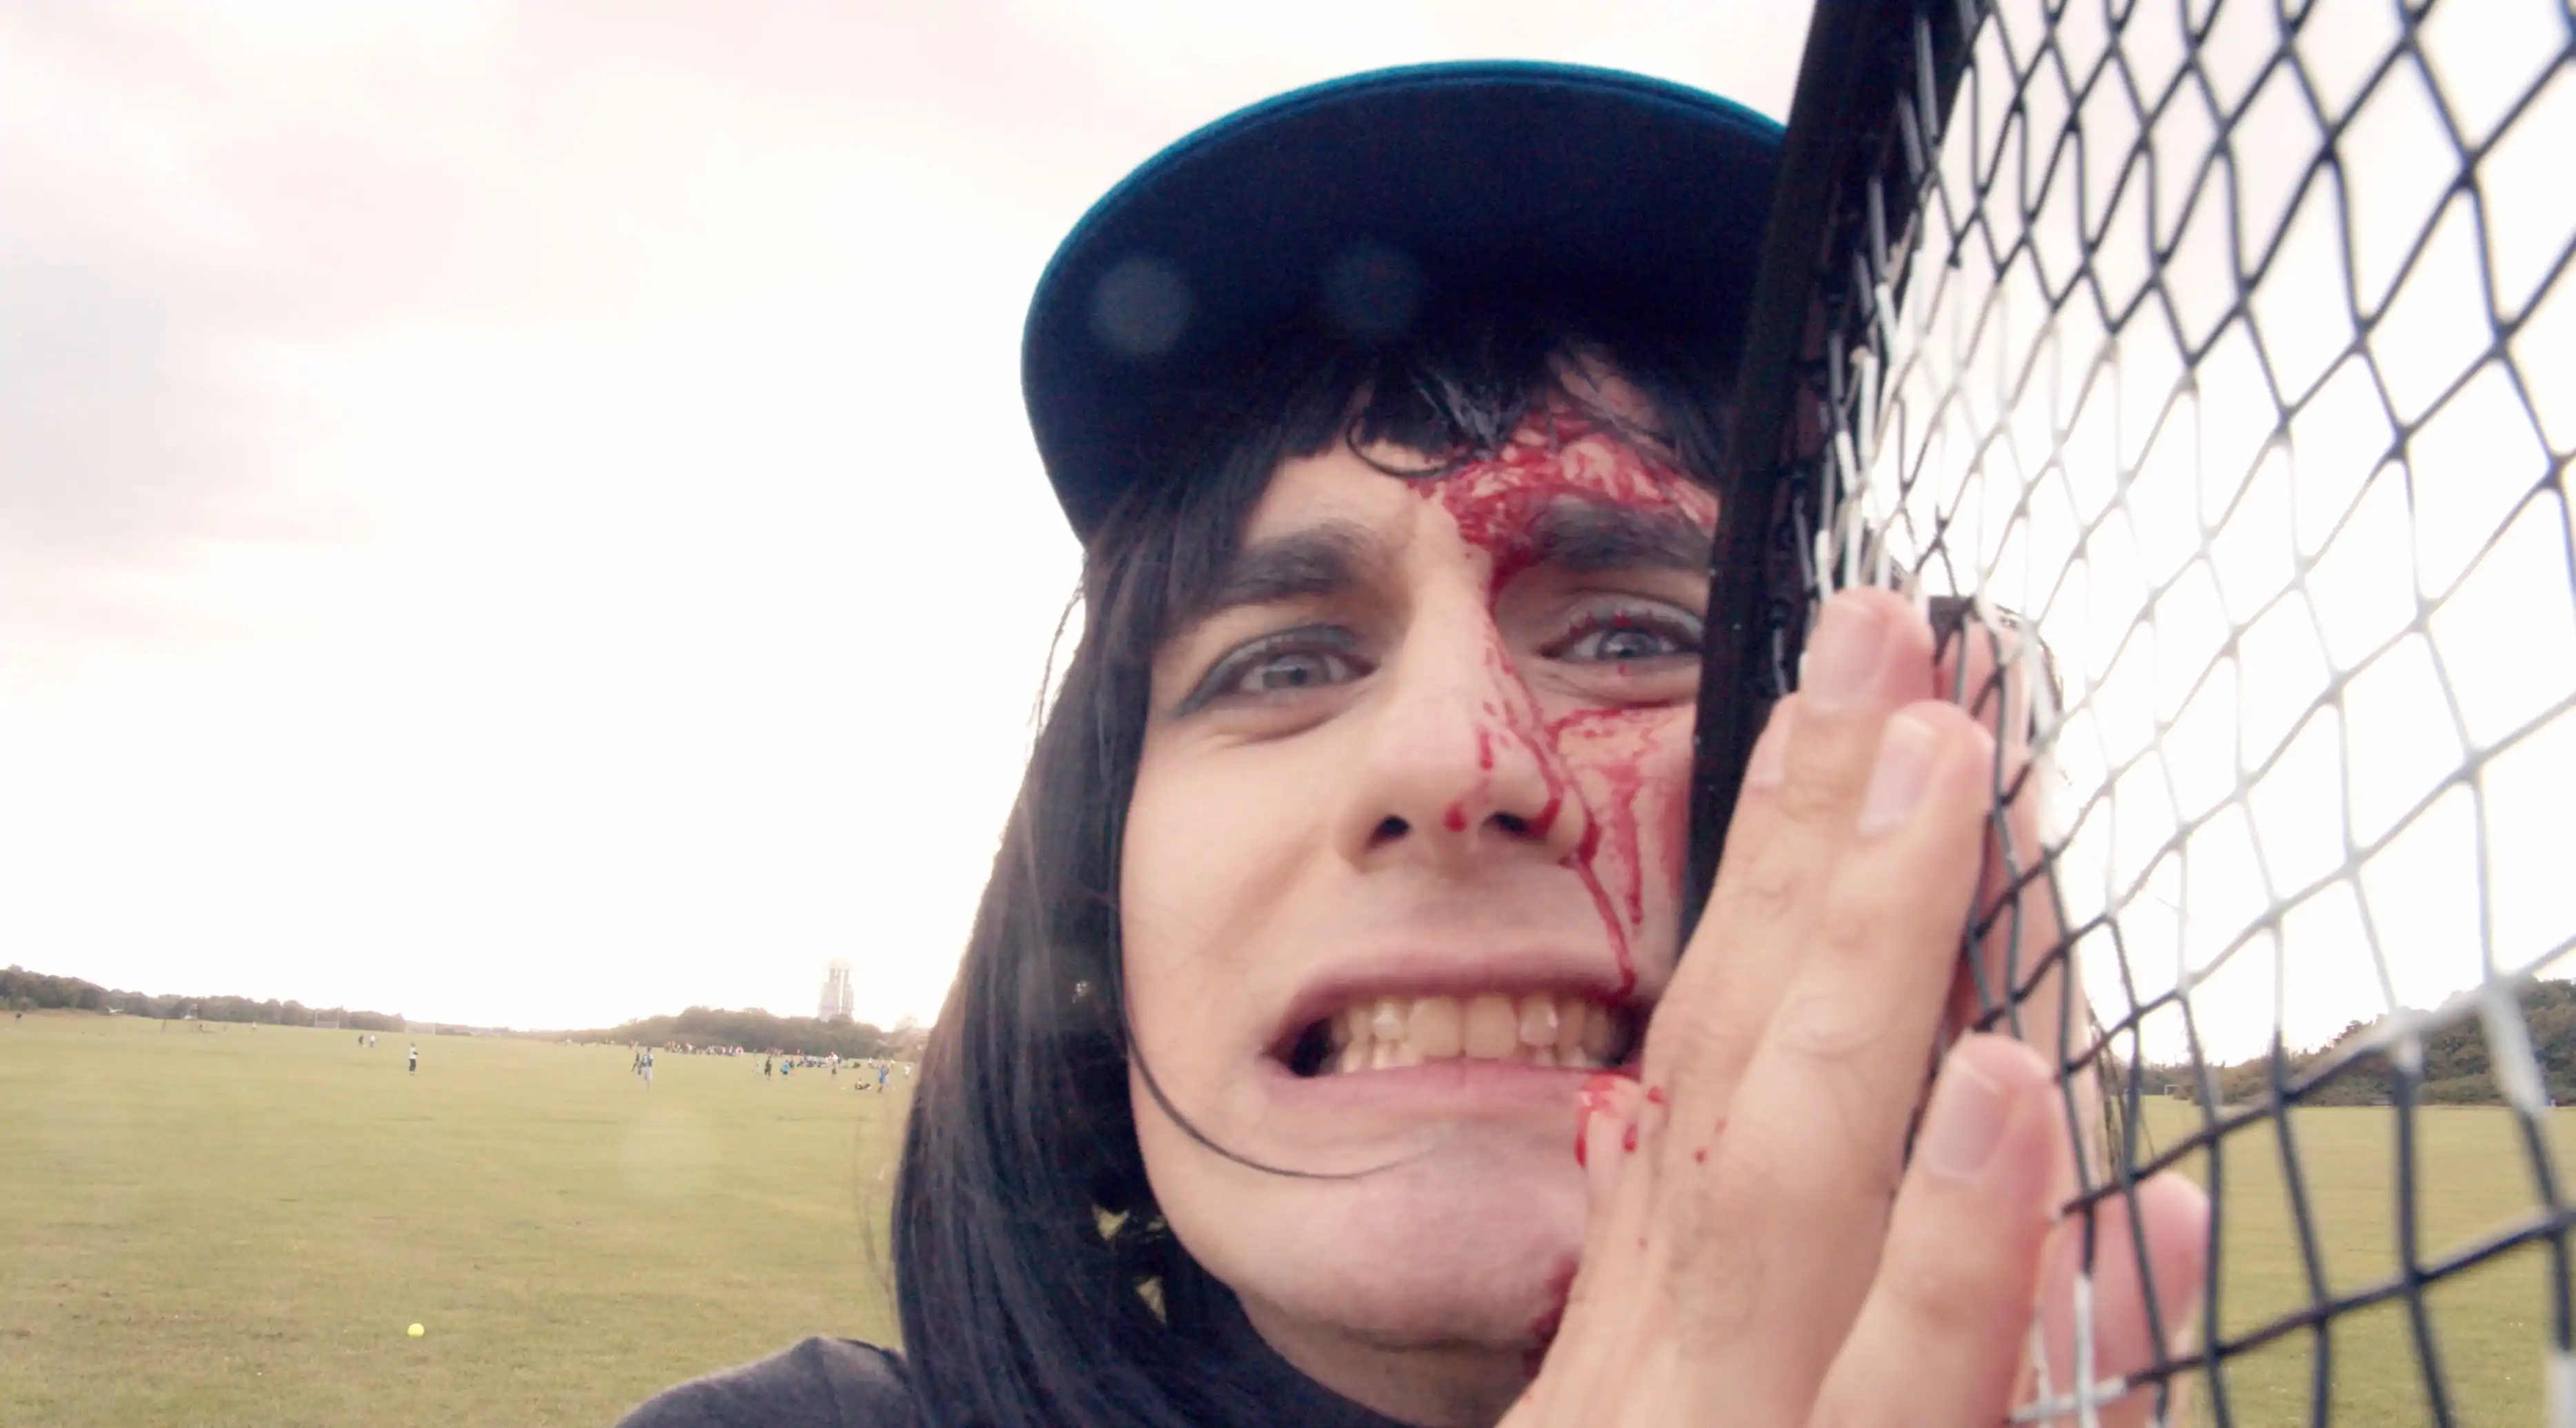 WA with a tennis racket lodged in their bloody face, THIS IS SPORT